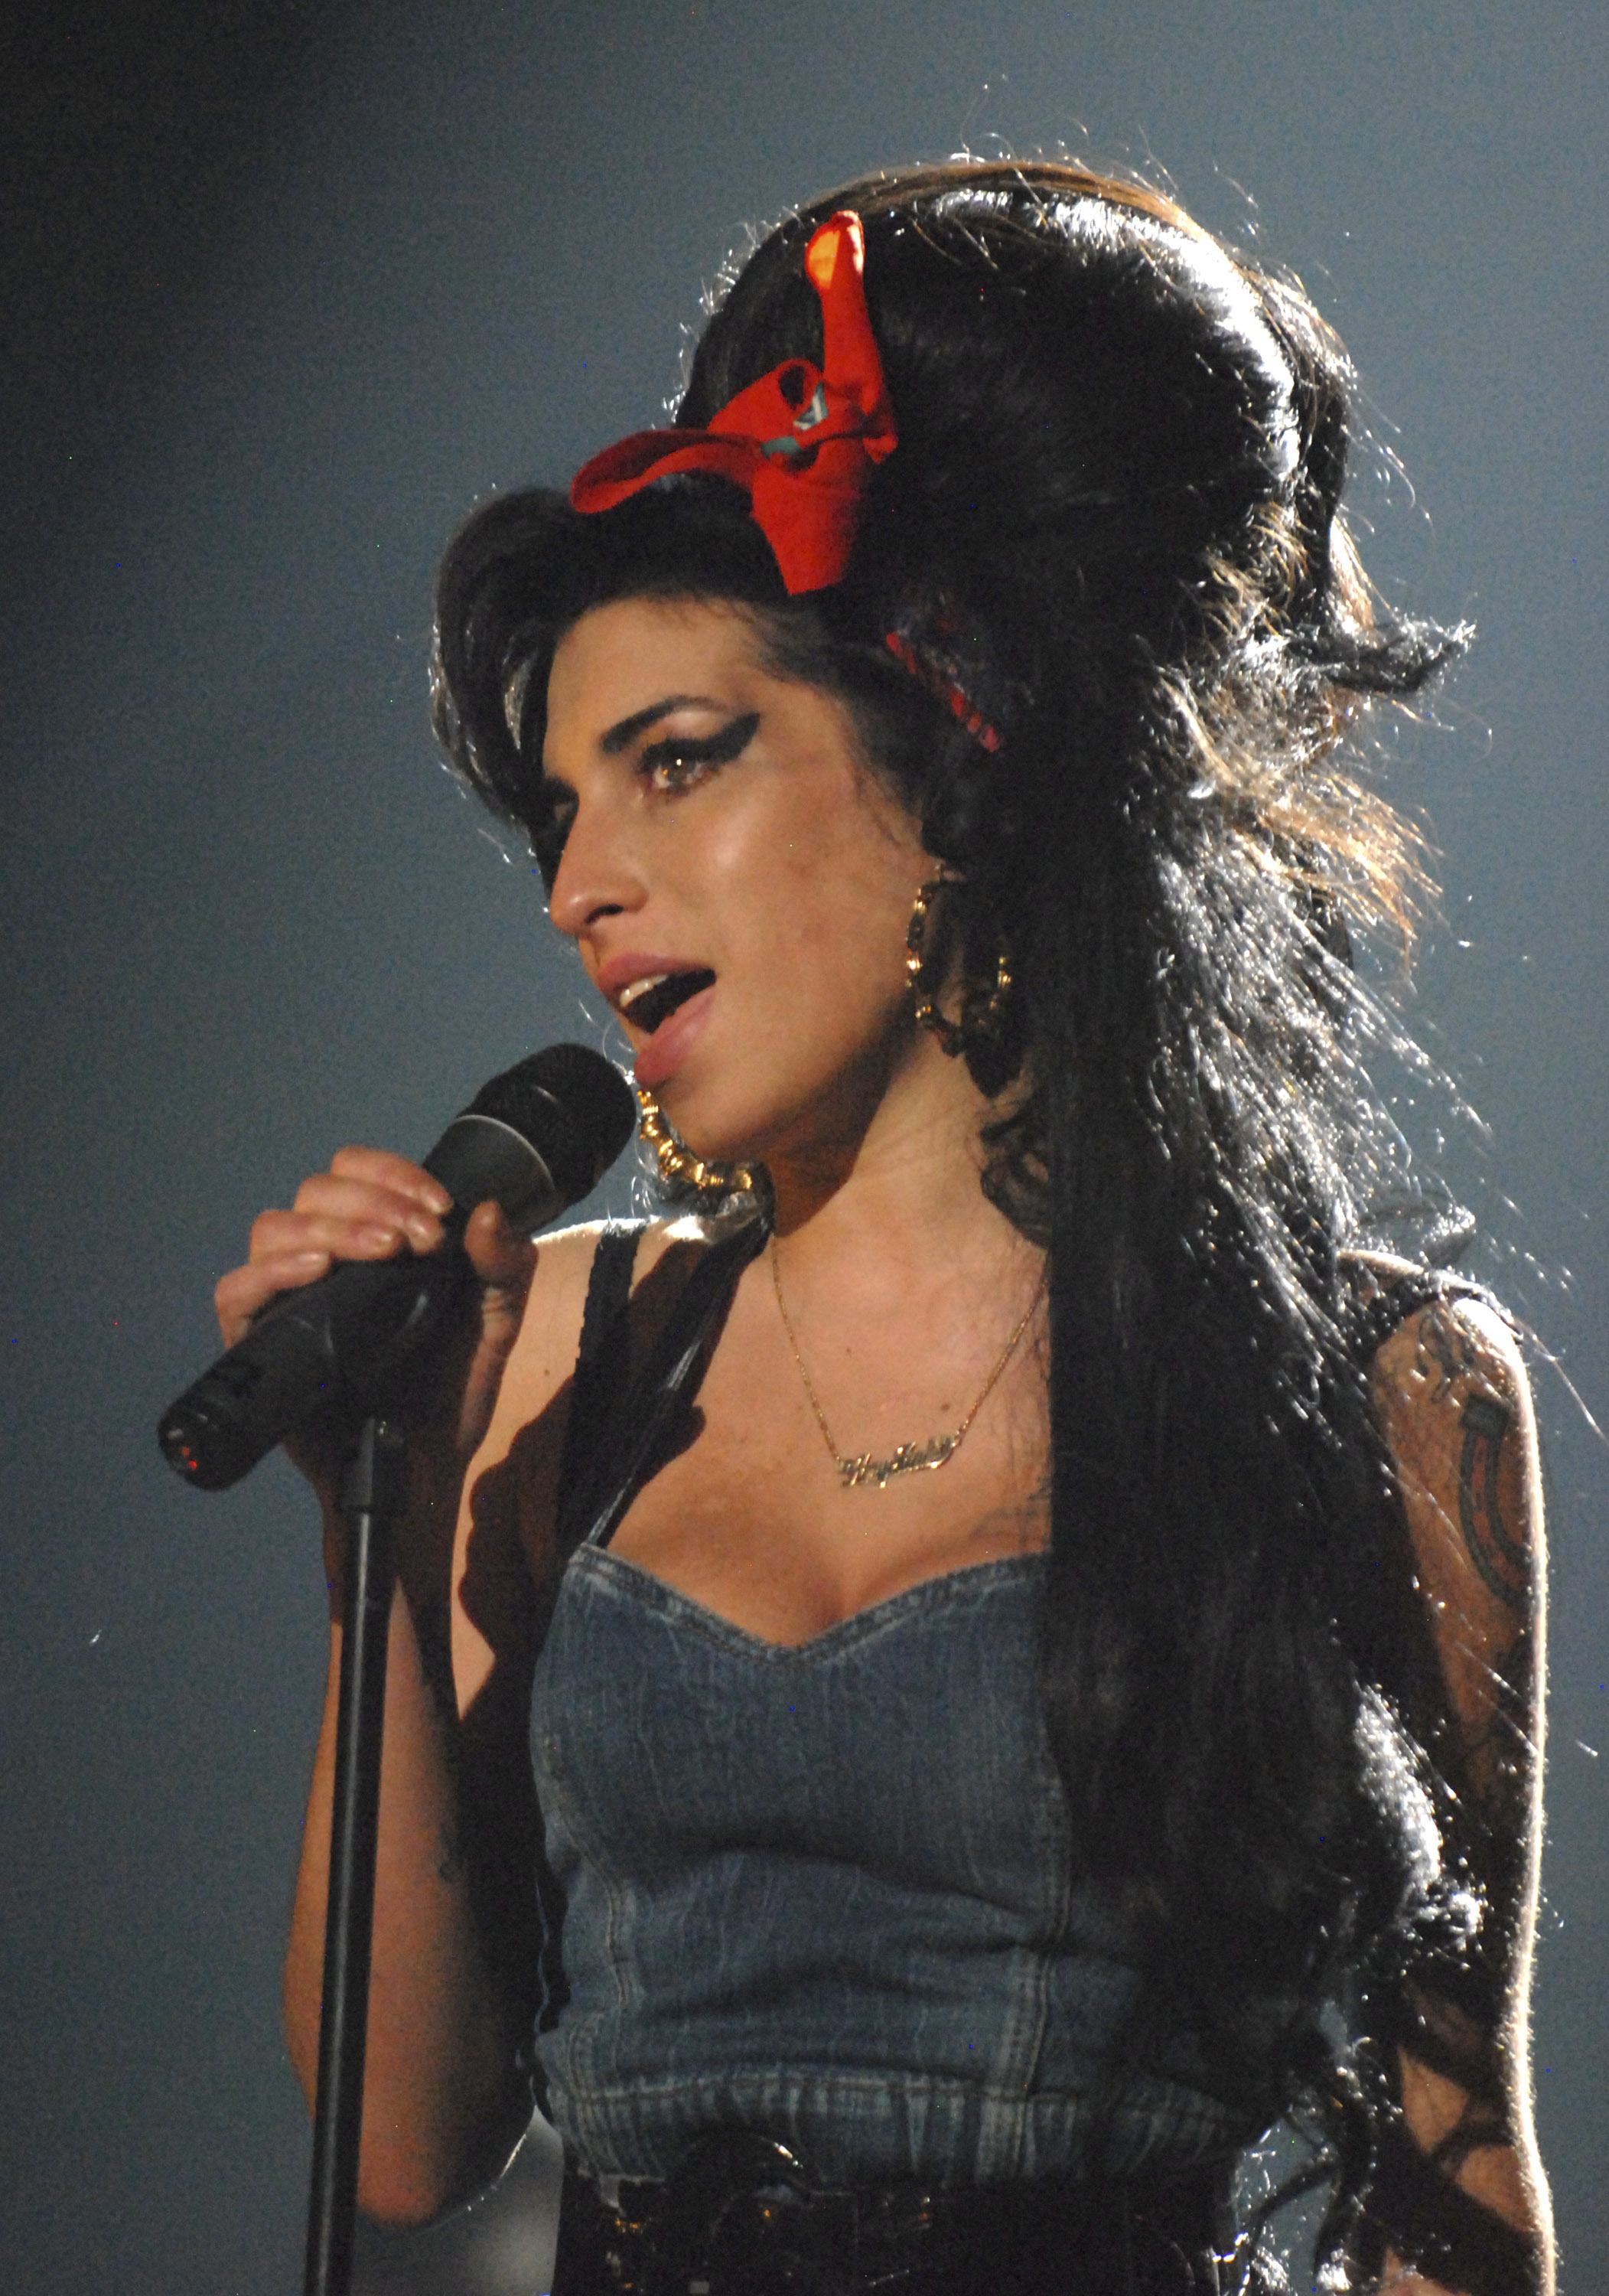 Amy Winehouse onstage